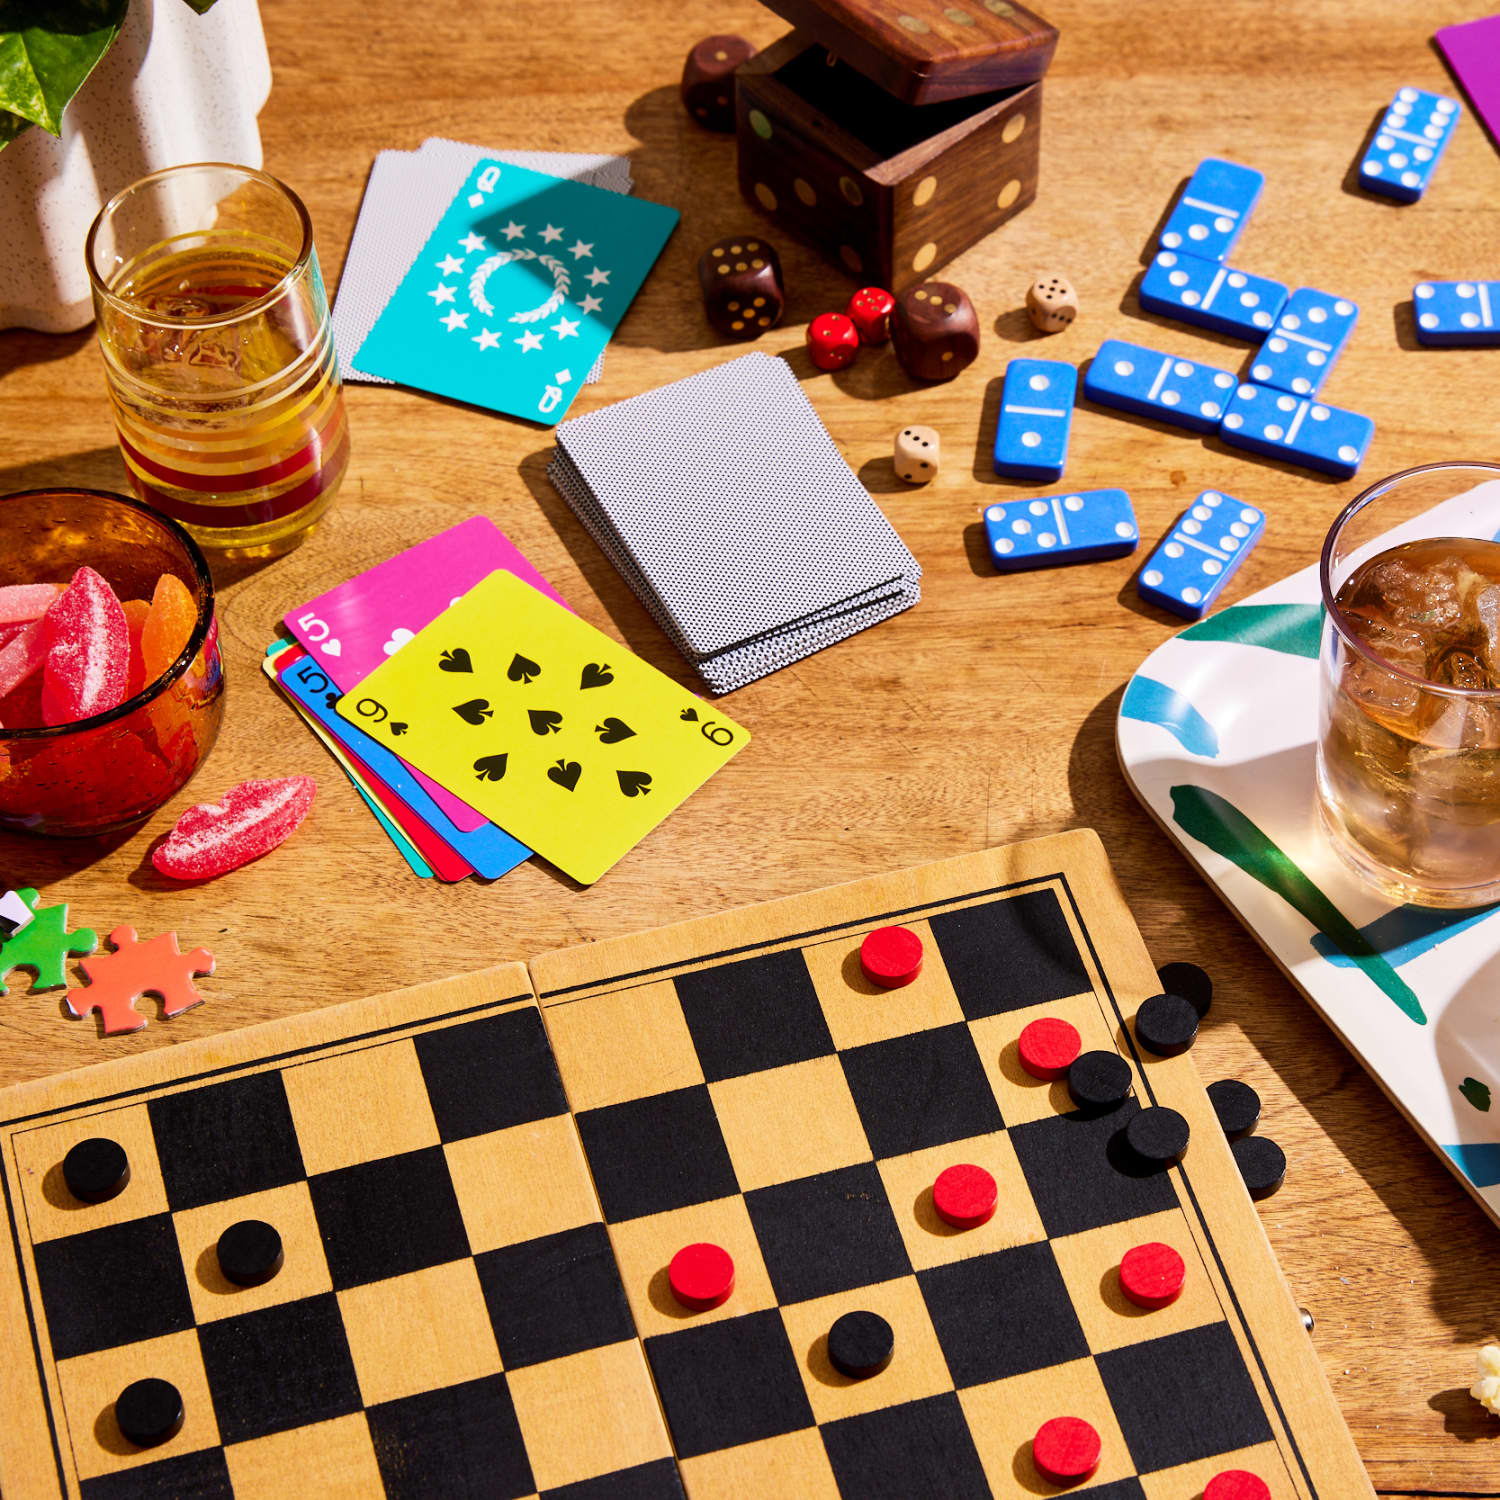 26 Classic Board Games for an Old-School Game Night